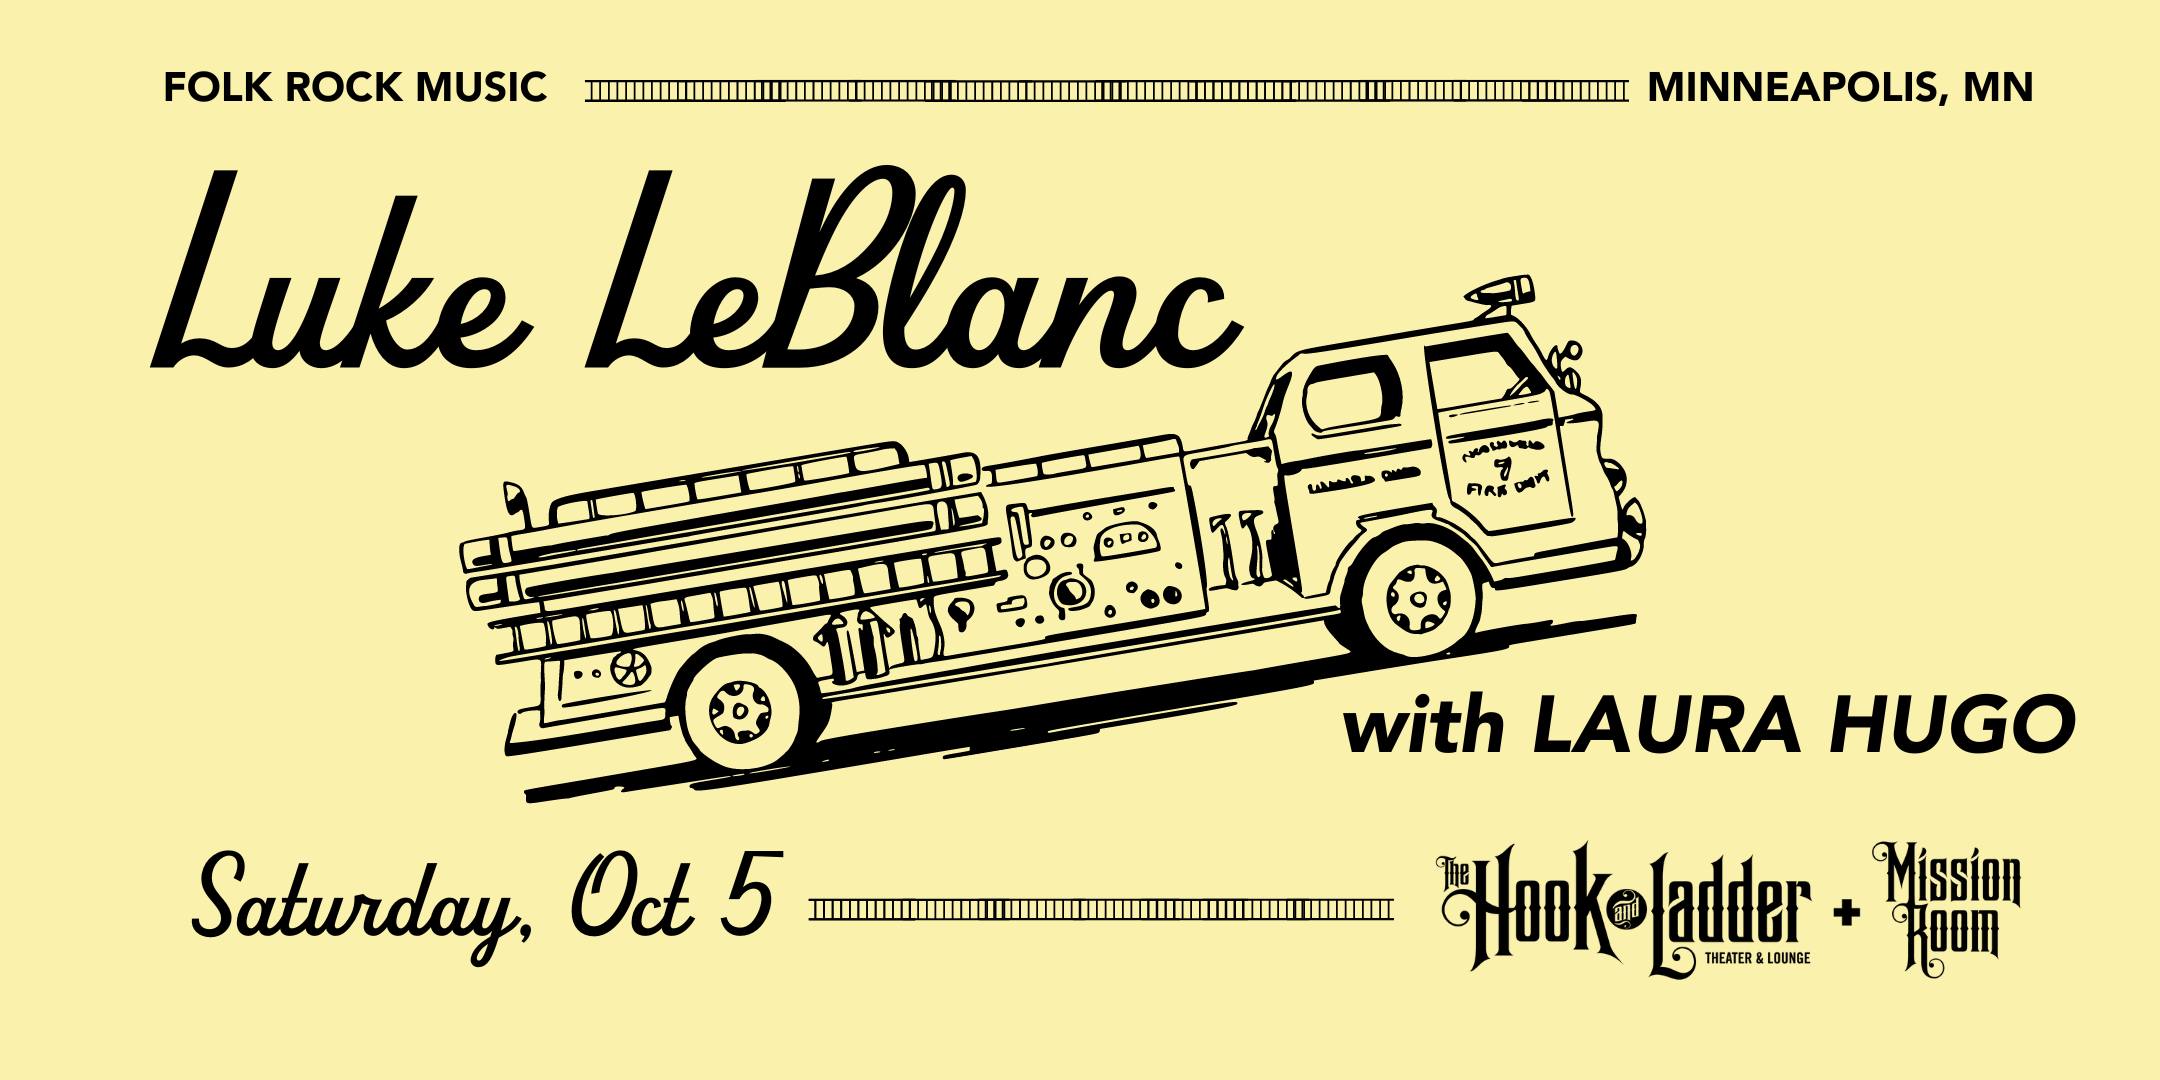 Luke LeBlanc with guest Laura Hugo Saturday, October 5 Mission Room at The Hook and Ladder Doors 7pm :: Music 8:00 $15 ADV / $20 DOS Seating Available on a first-come first-served basis.